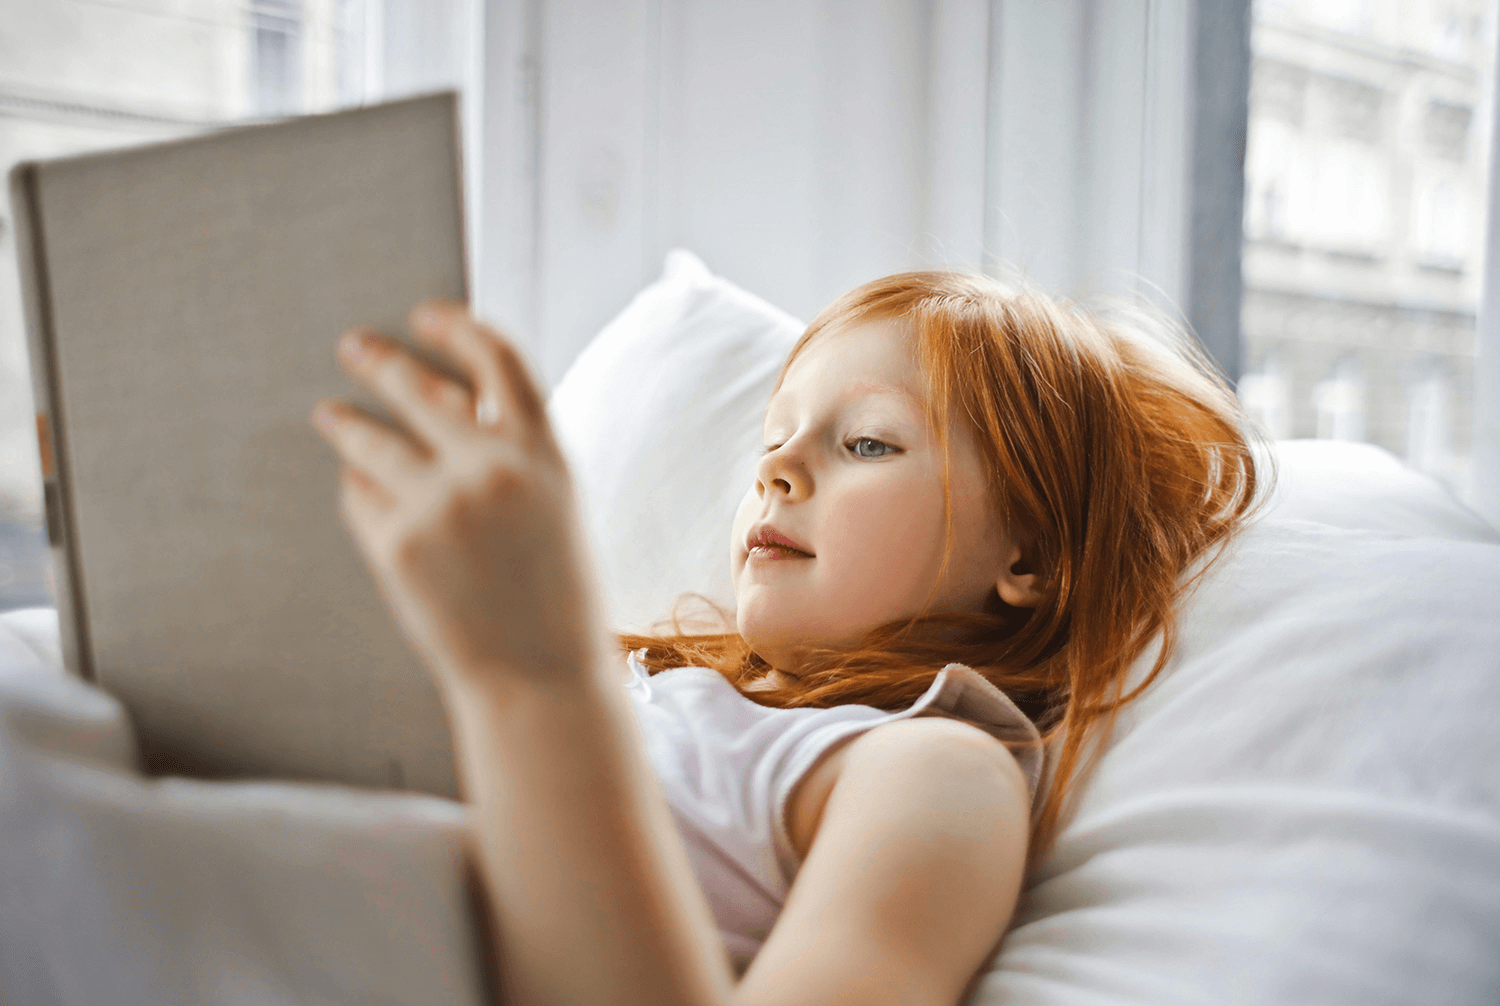 A girl reading a book while lying on a bed.